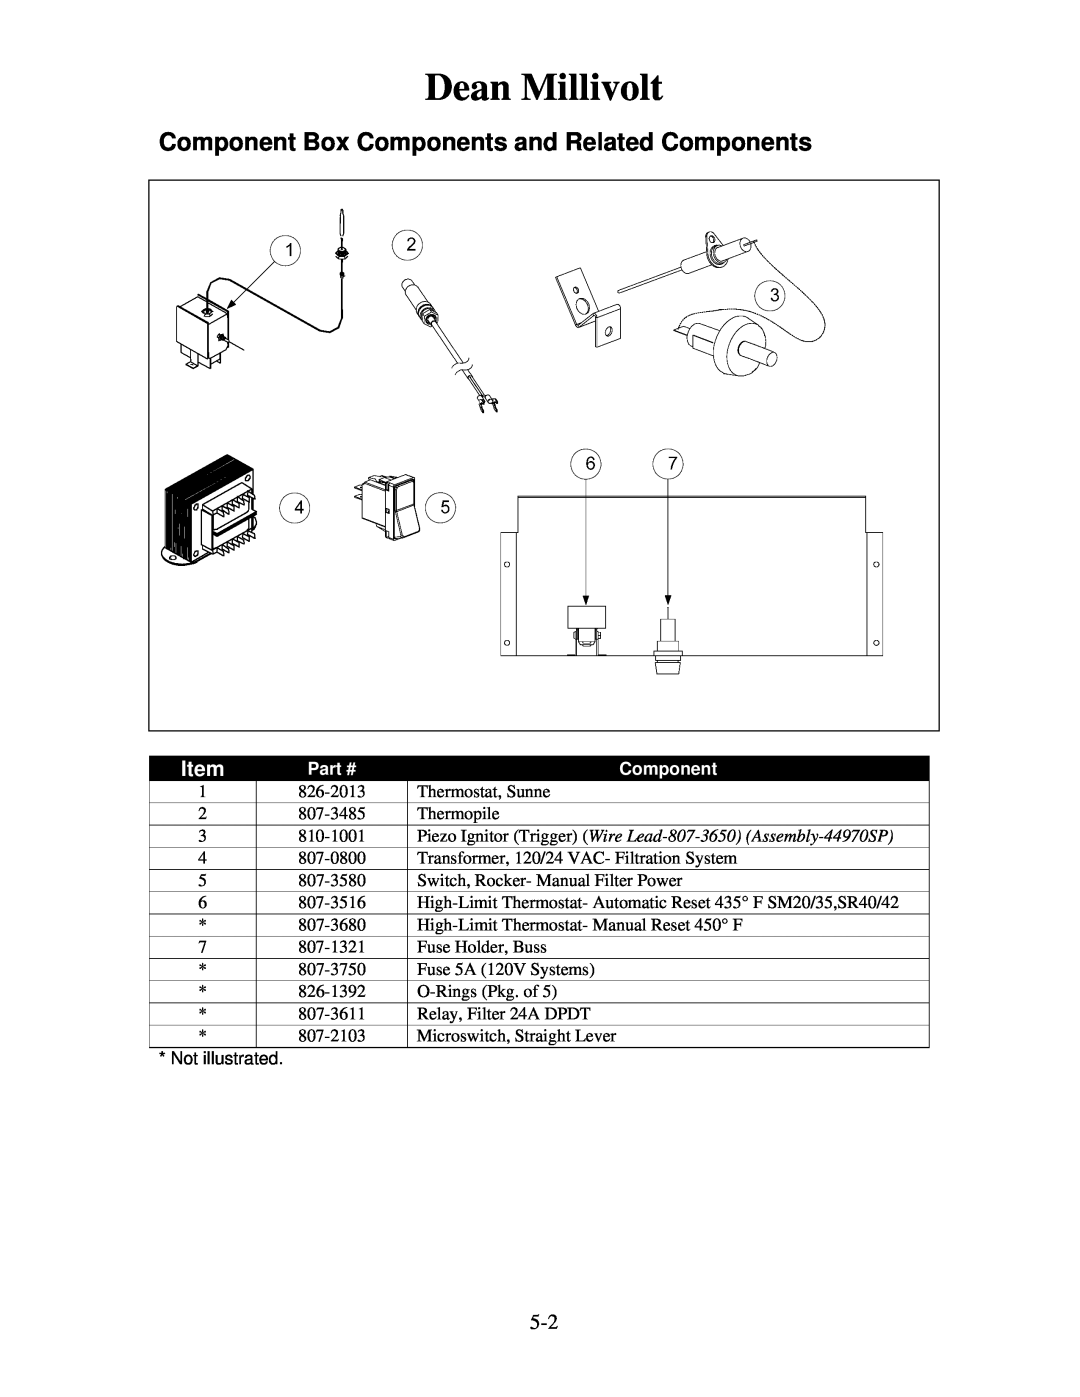 Frymaster 8196321 manual Component Box Components and Related Components, Dean Millivolt 